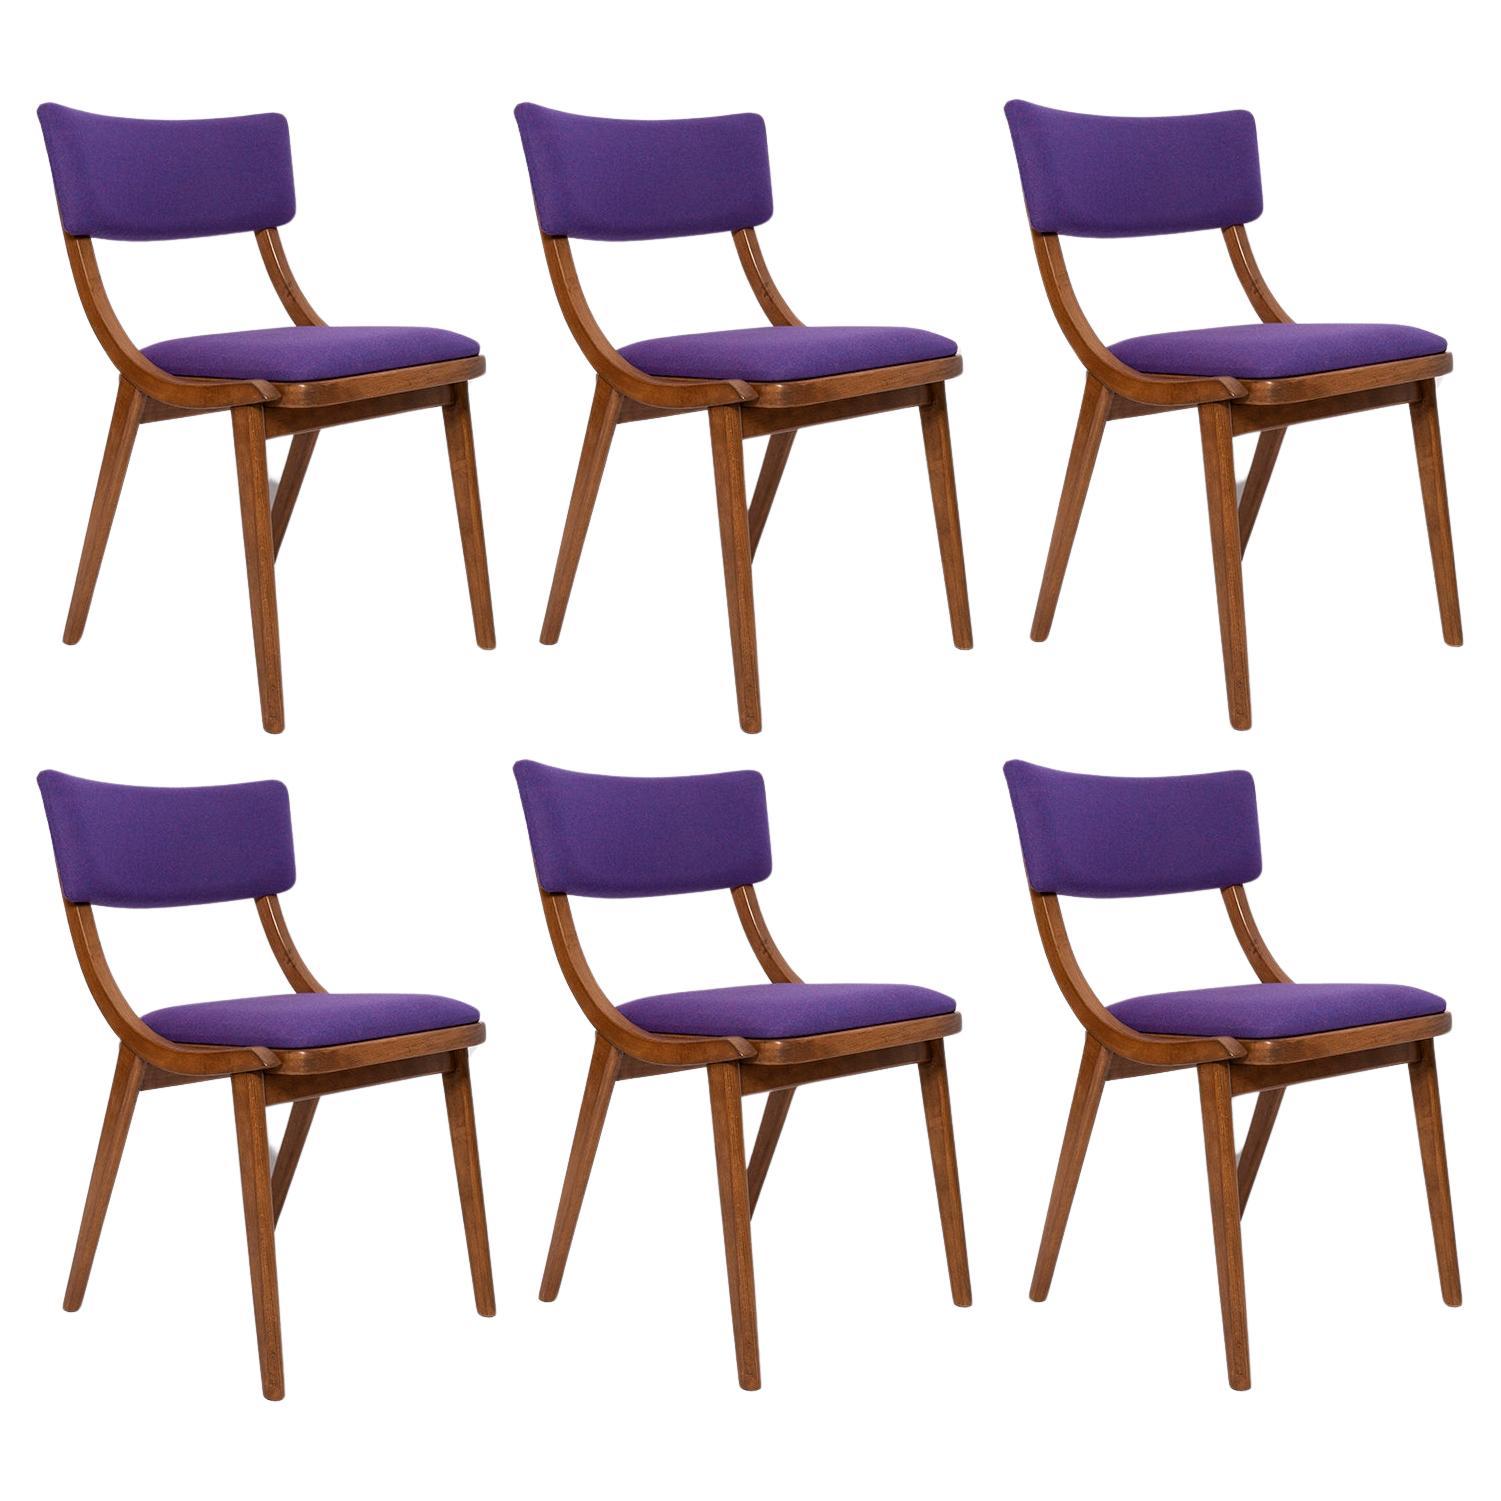 Six Mid Century Modern Bumerang Chairs, Purple Violet Wool, Poland, 1960s For Sale